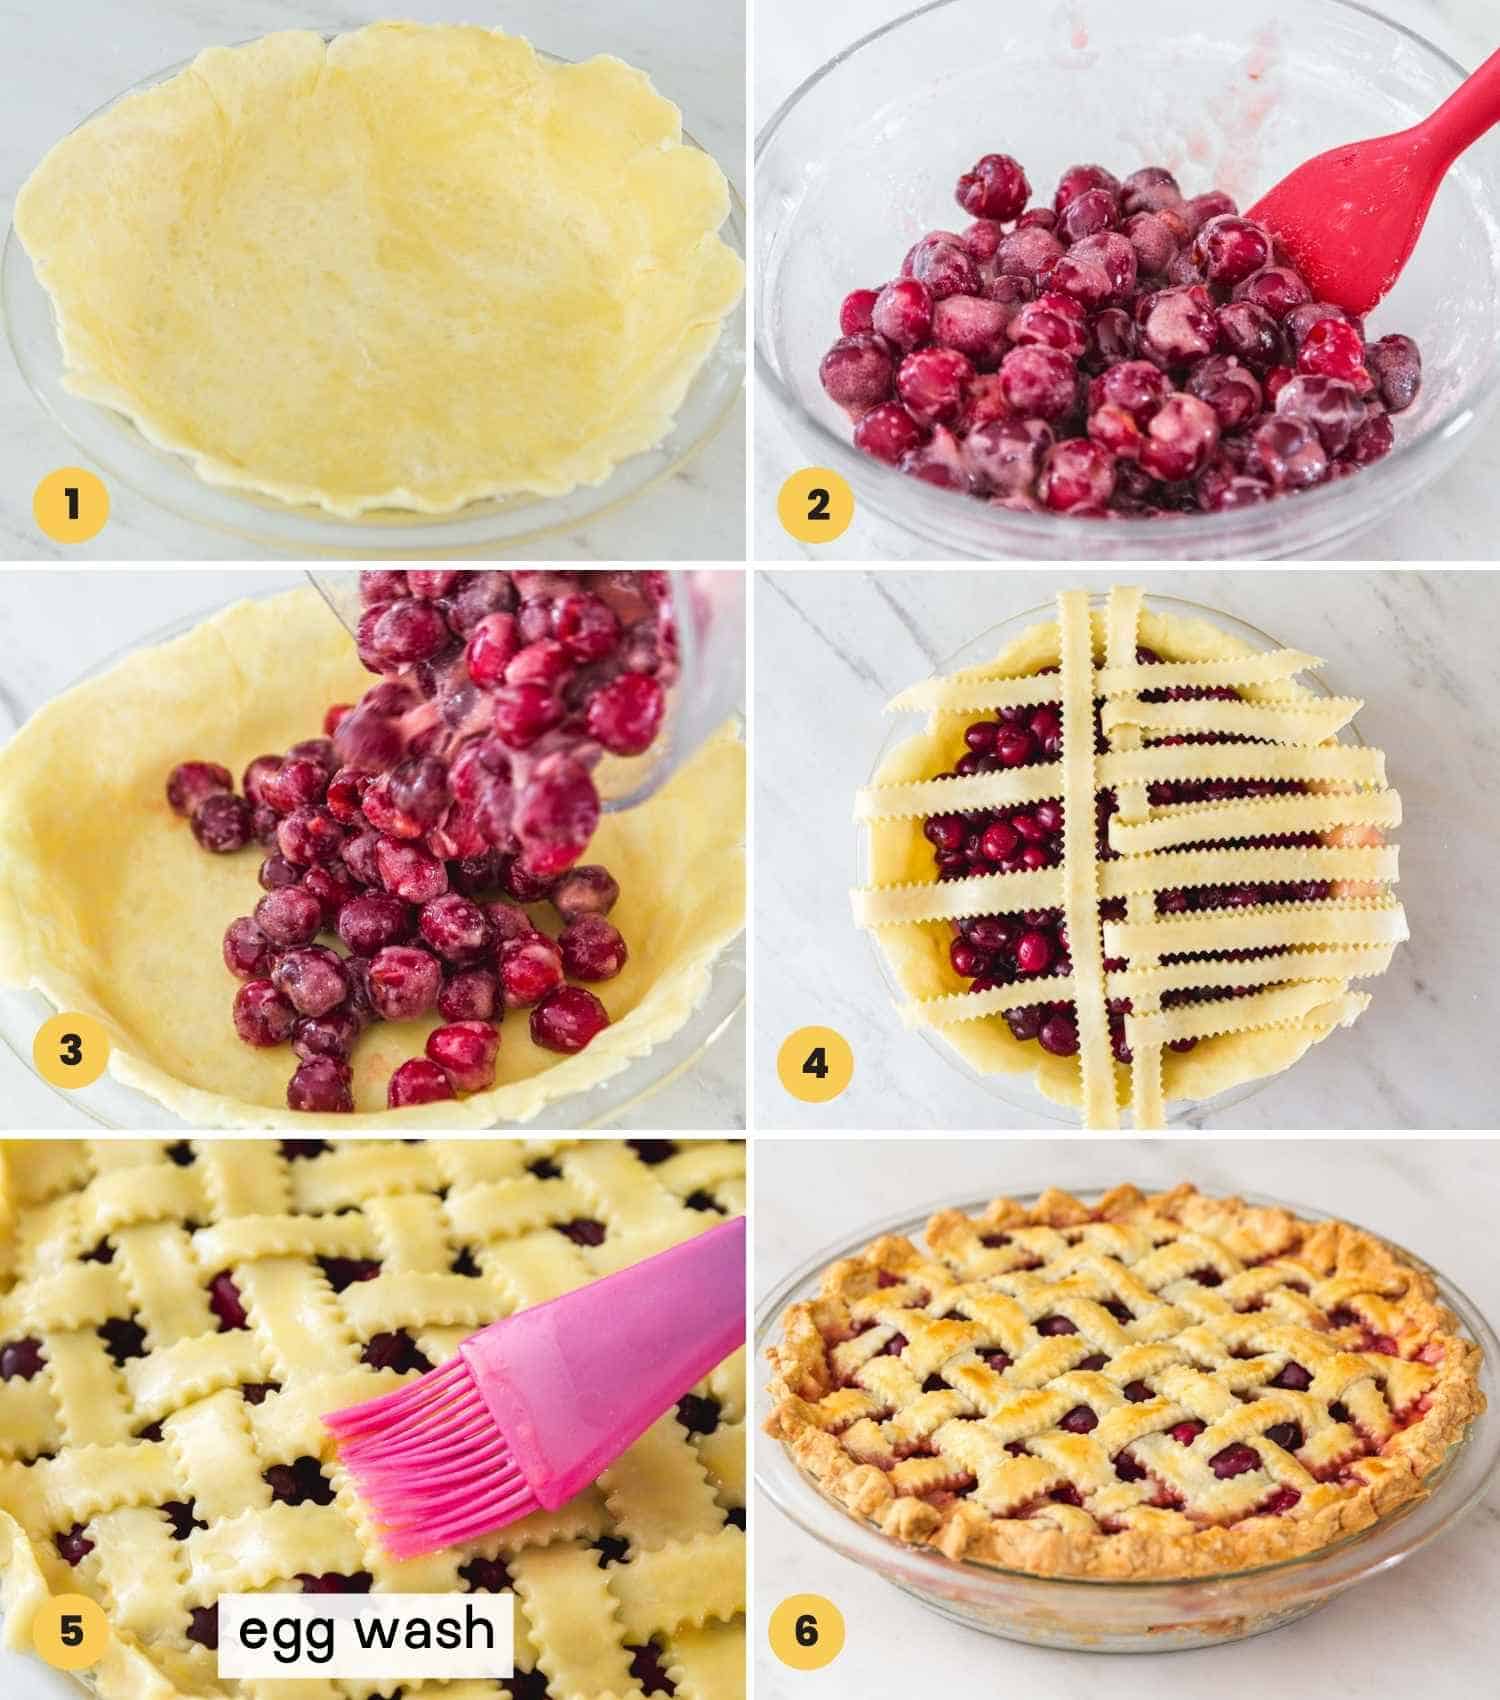 A collage with 6 images showing how to make a cherry pie